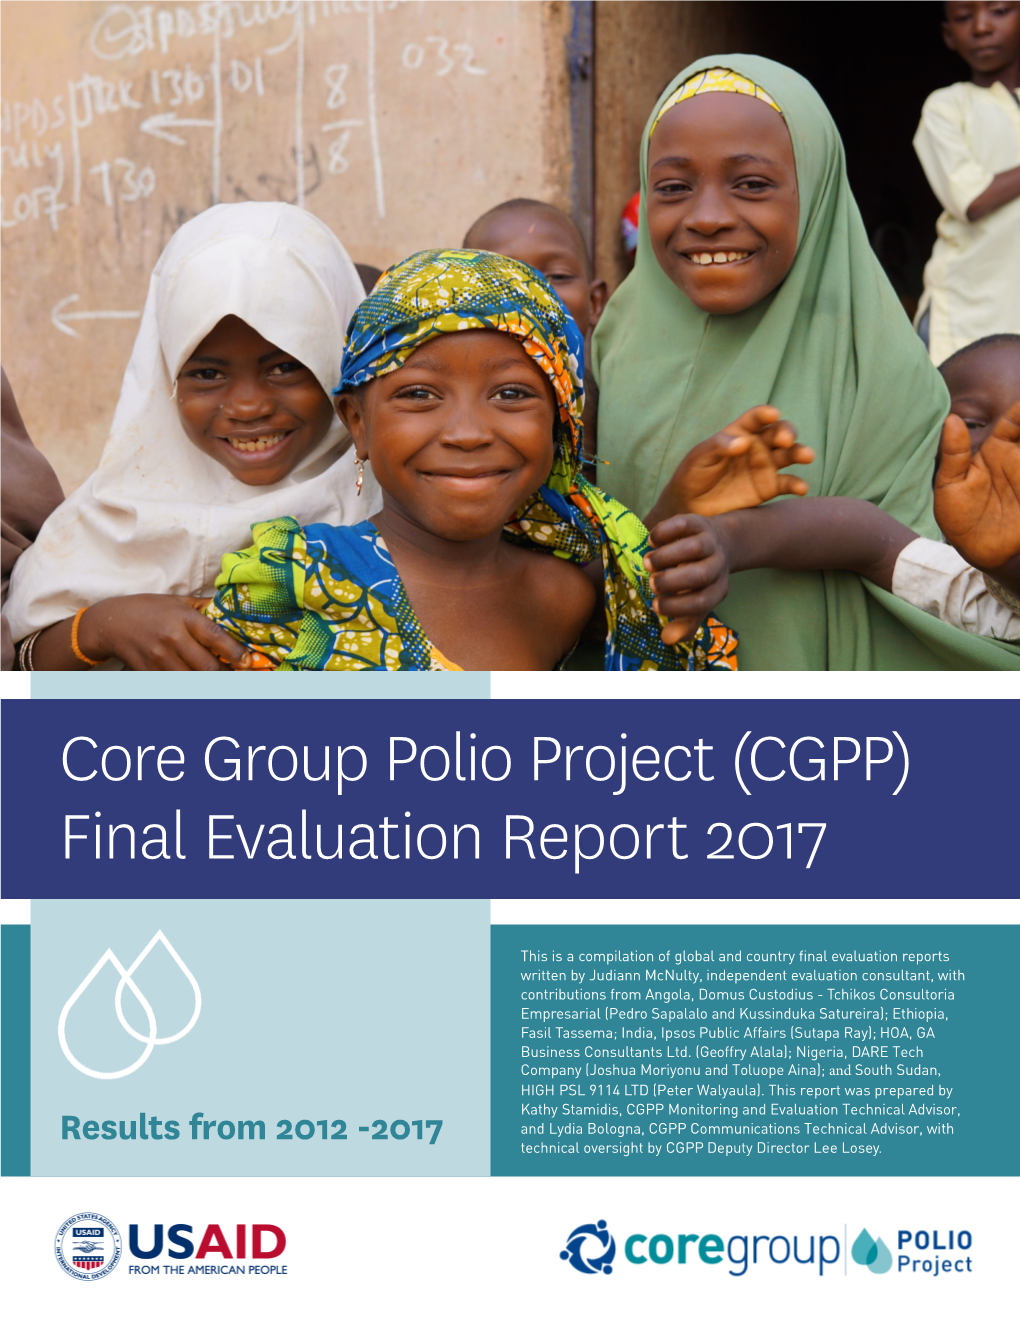 Core Group Polio Project (CGPP) Final Evaluation Report 2017